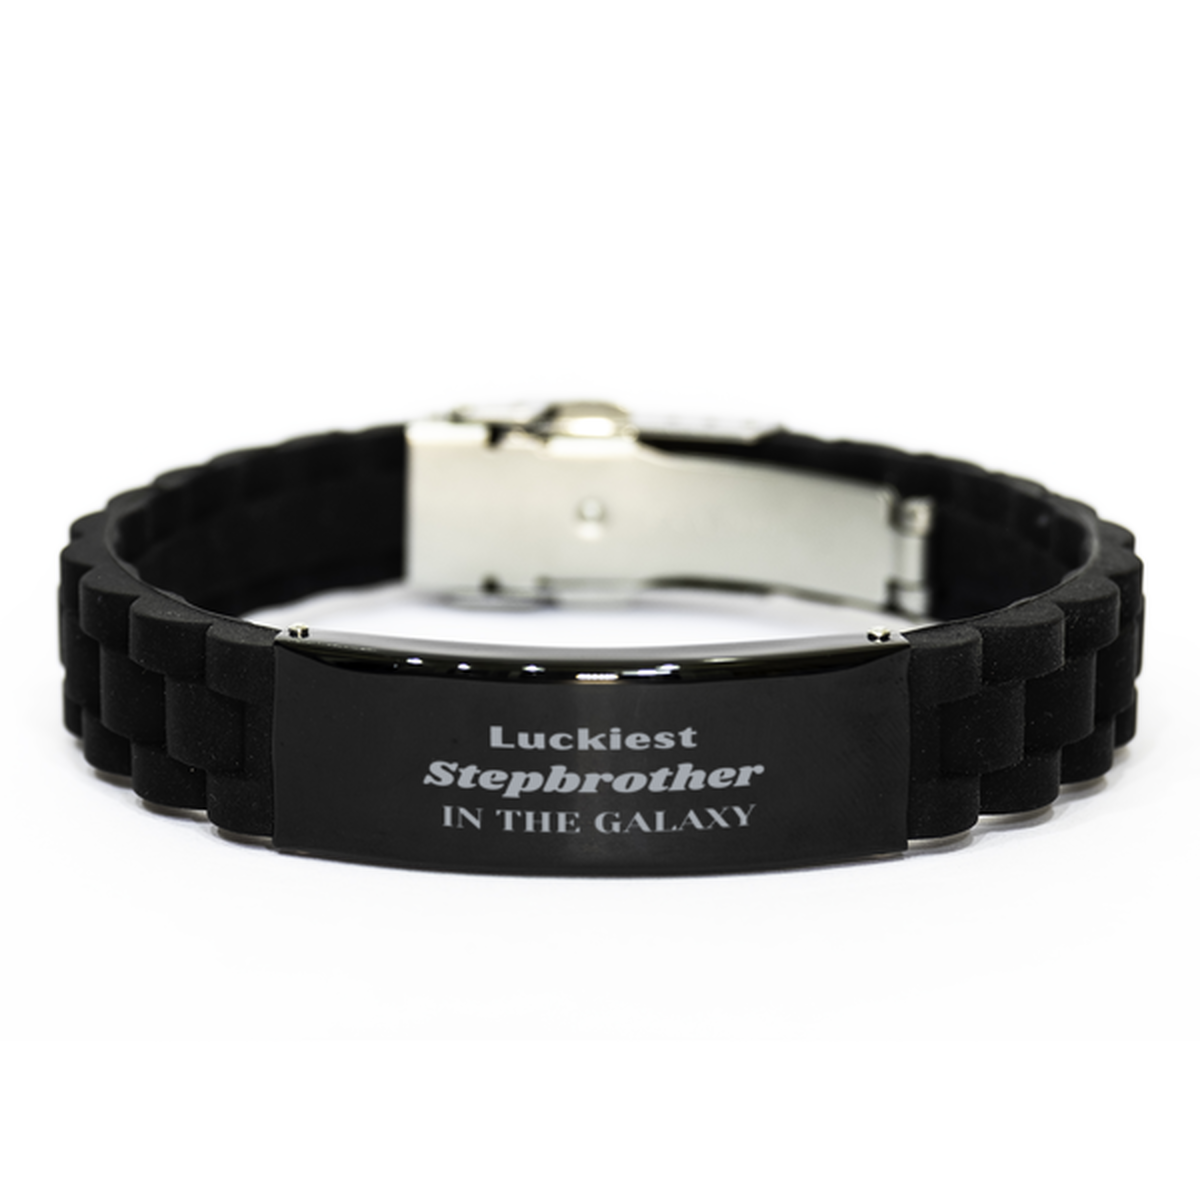 Luckiest Stepbrother in the Galaxy, To My Stepbrother Engraved Gifts, Christmas Stepbrother Black Glidelock Clasp Bracelet Gifts, X-mas Birthday Unique Gifts For Stepbrother Men Women